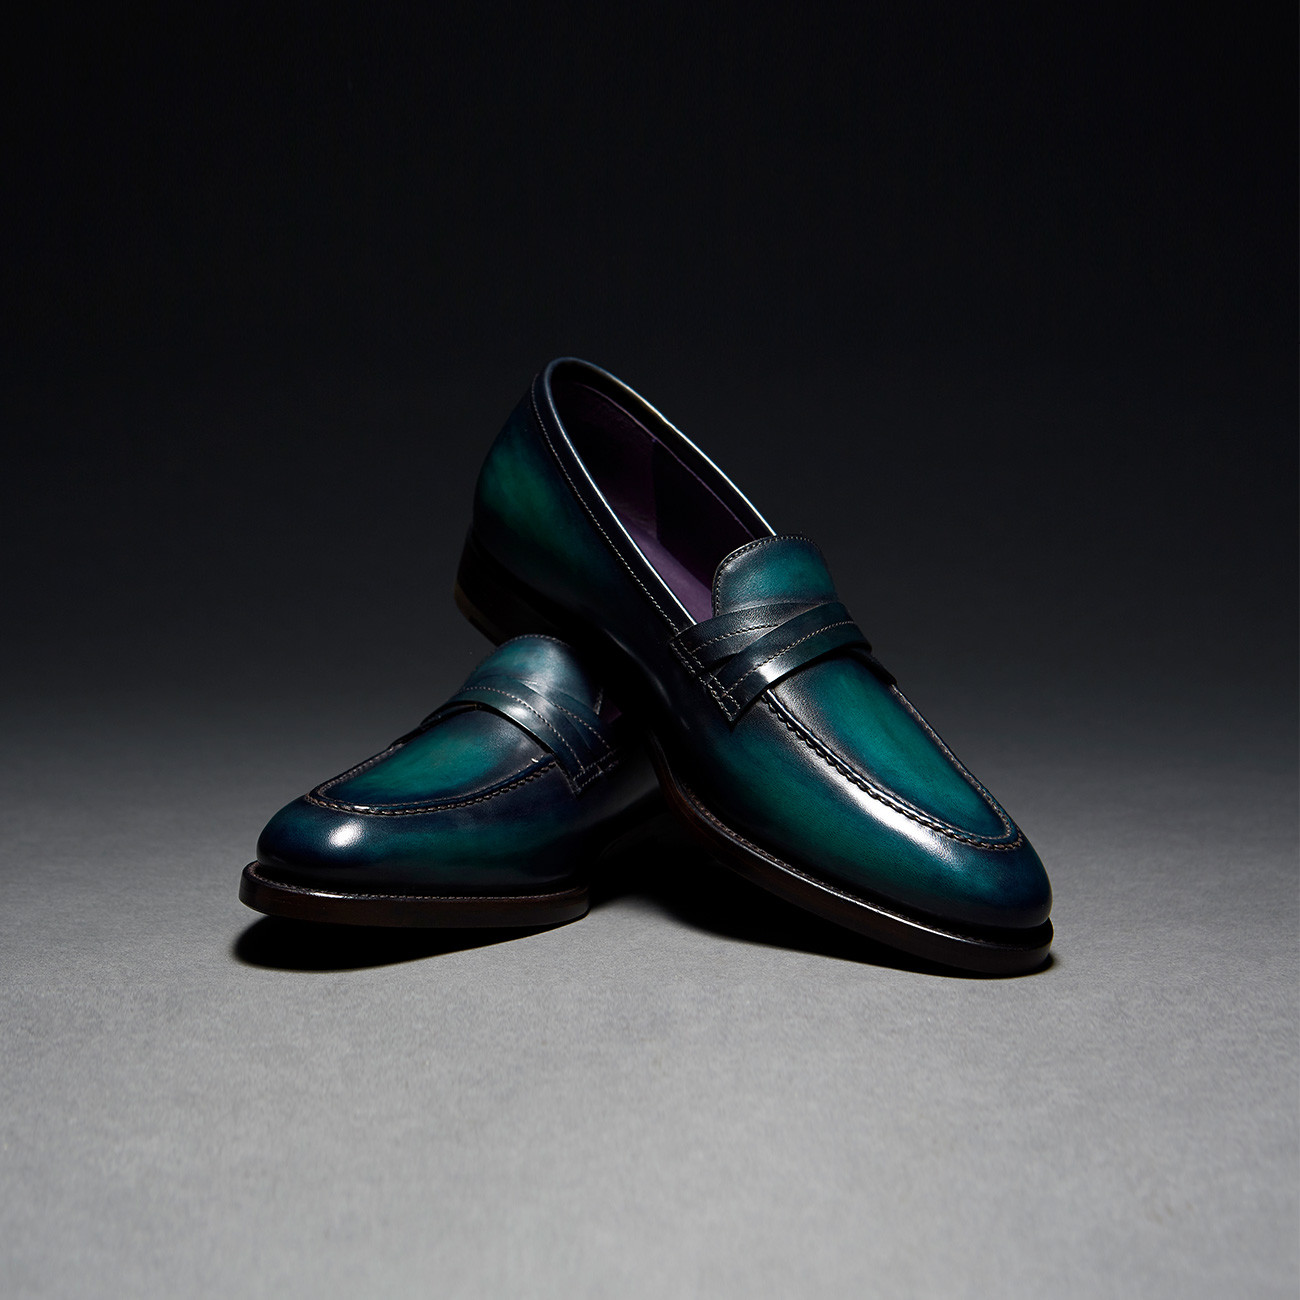 [Custommania X The shuri] PATINA LOAFER LAF No.549